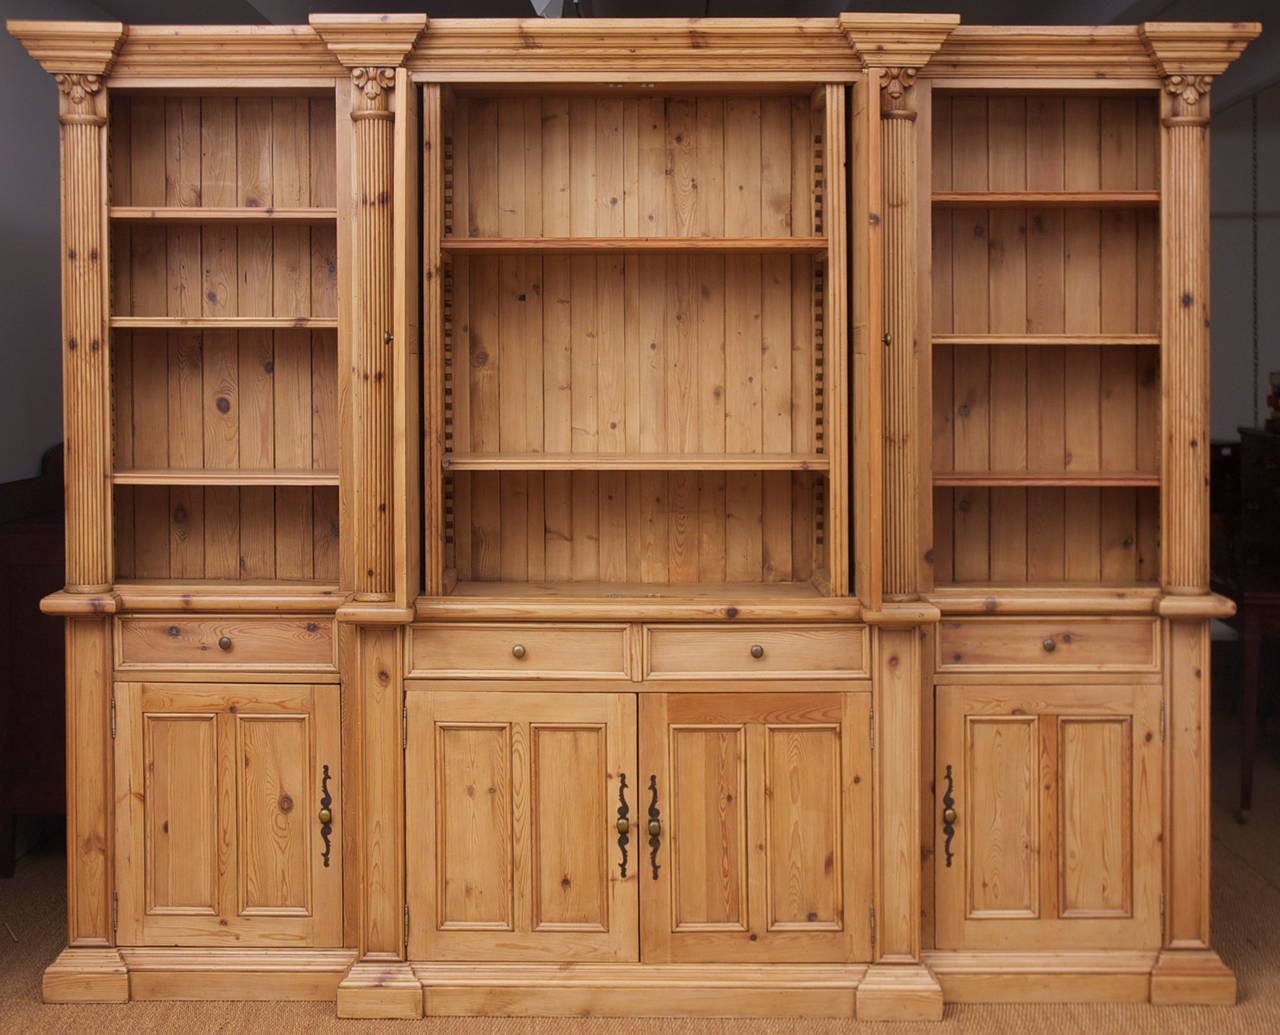 European Long Bookcase in Reclaimed Antique Pine